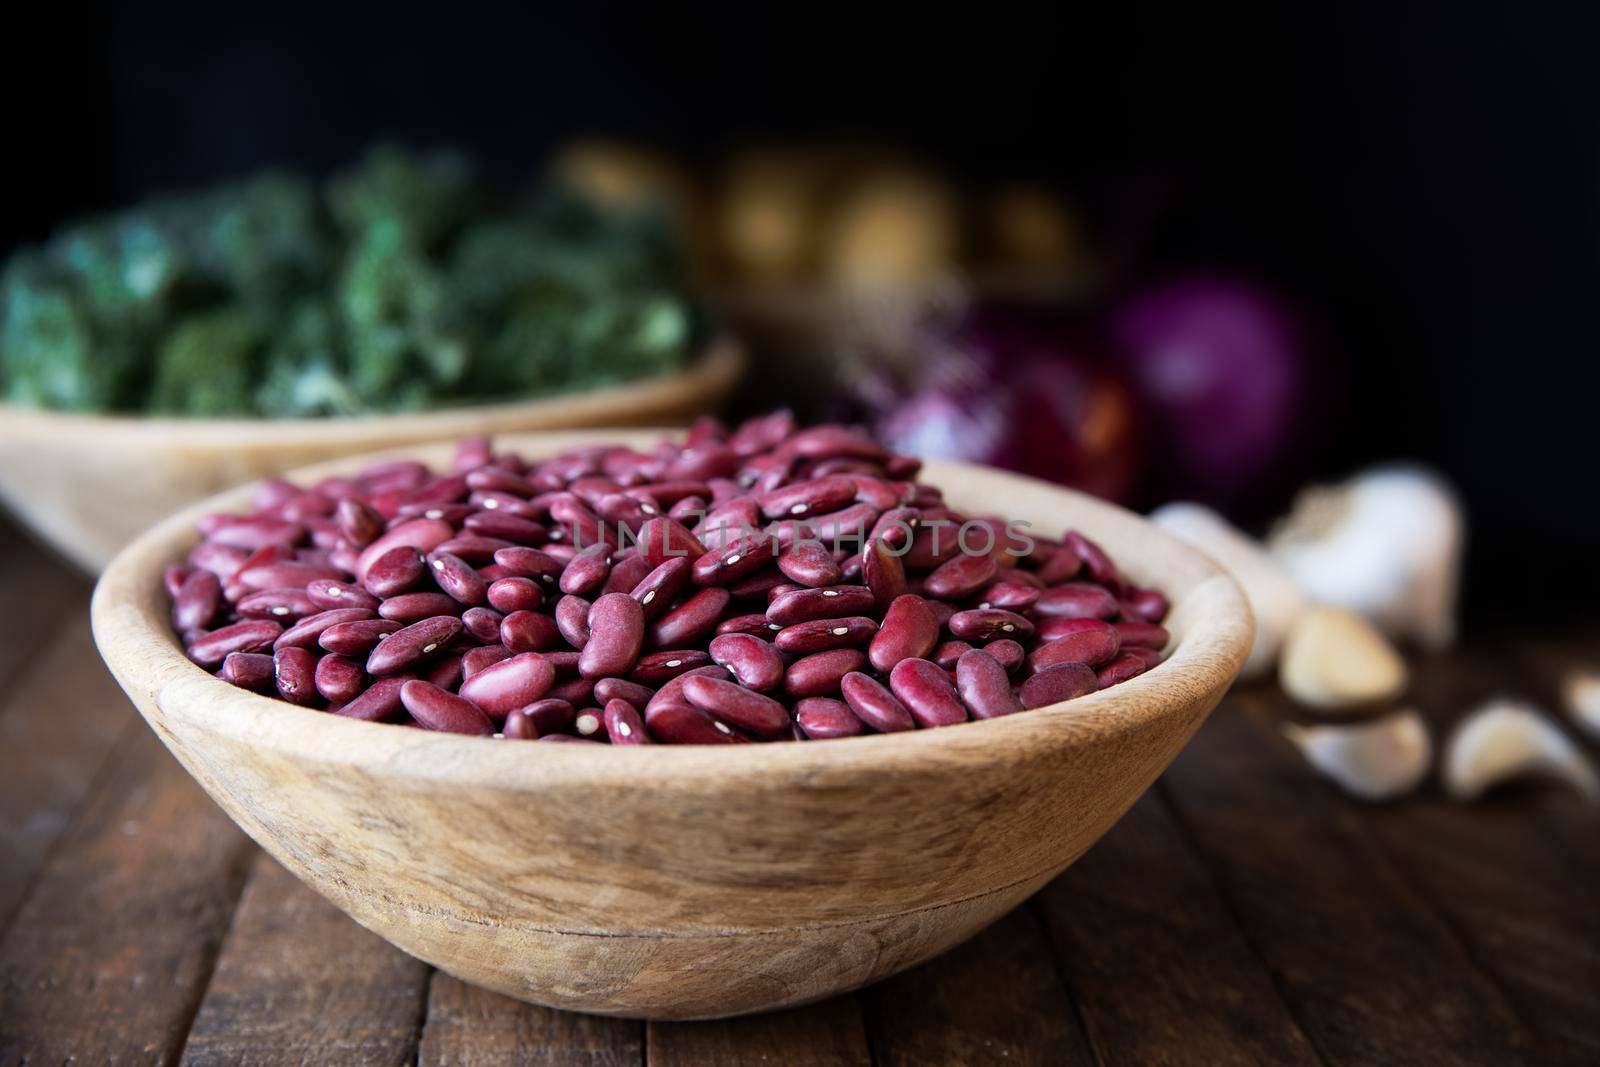 Dried Red Beans in a Wooden Bowl by charlotteLake